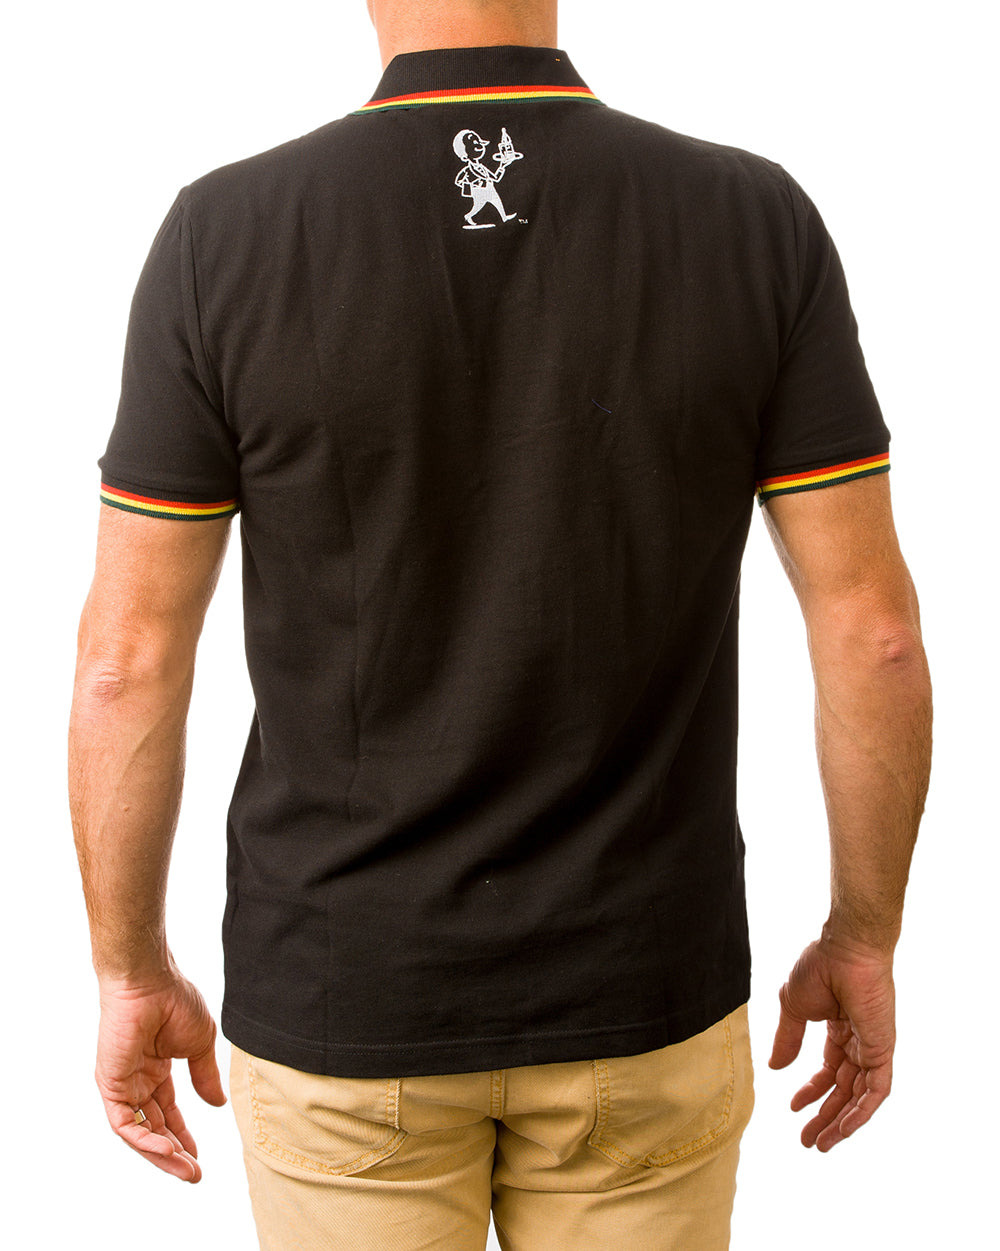 Waikato Draught Polo -  Beer Gear Apparel & Merchandise - Speights - Lion Red - VB - Tokyo Dy merch